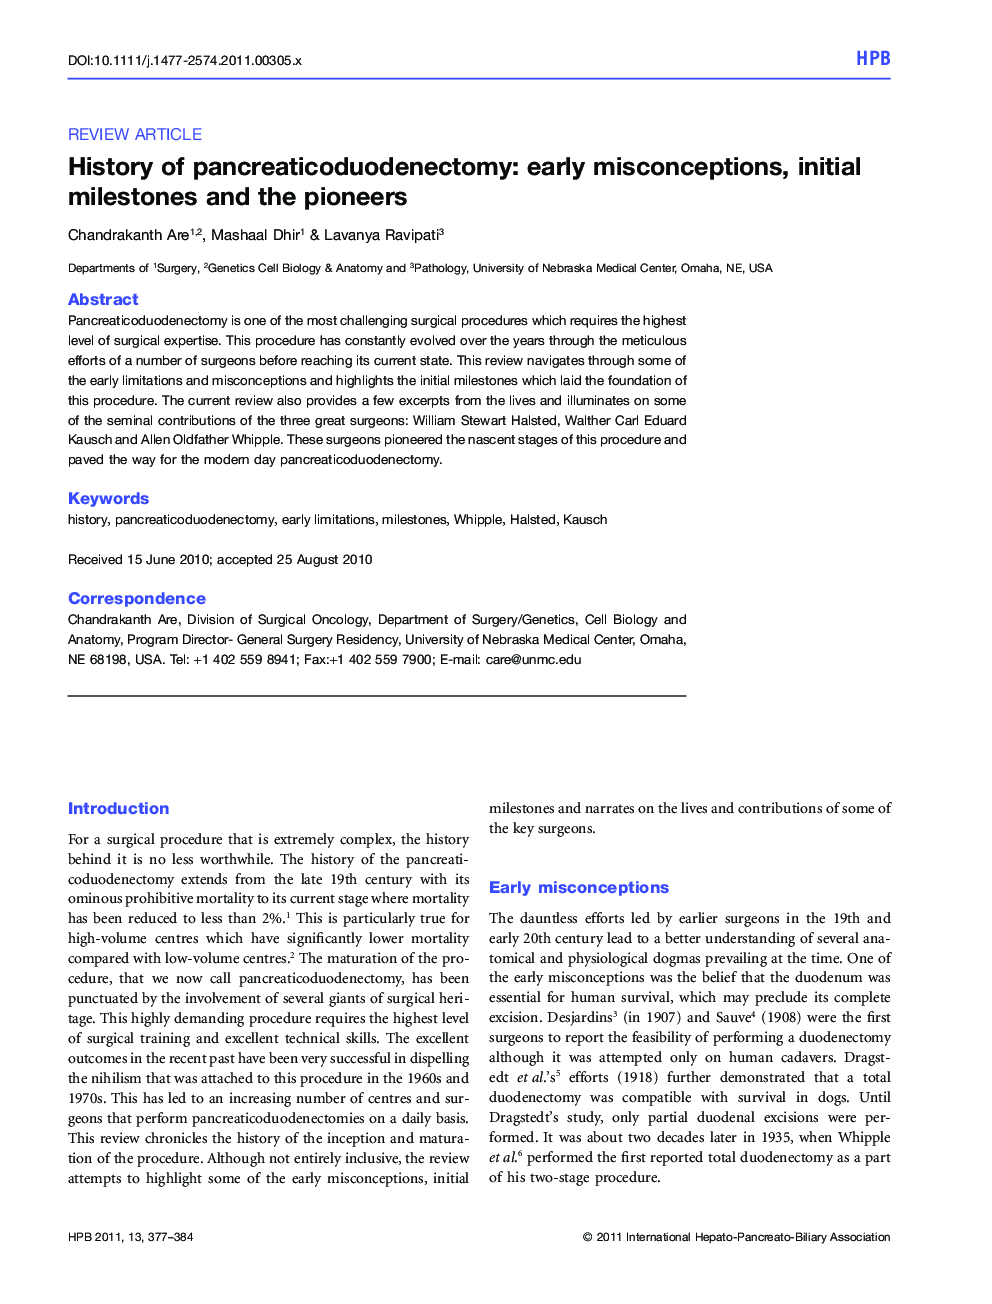 History of pancreaticoduodenectomy: early misconceptions, initial milestones and the pioneers